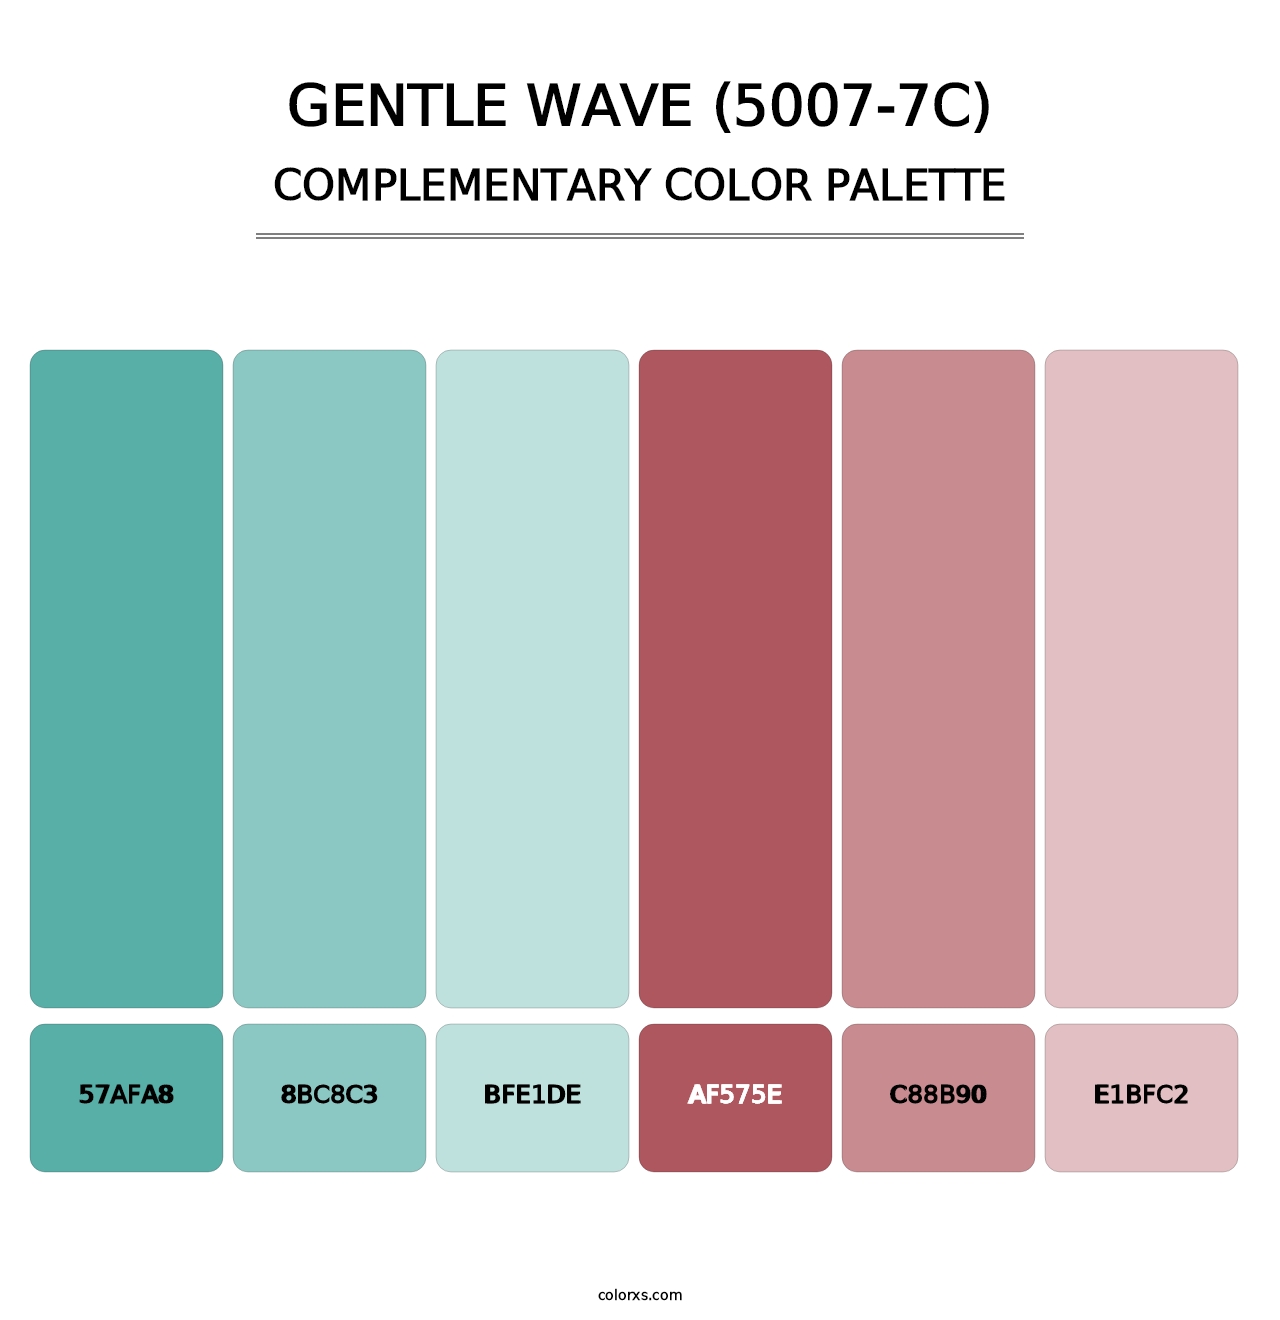 Gentle Wave (5007-7C) - Complementary Color Palette